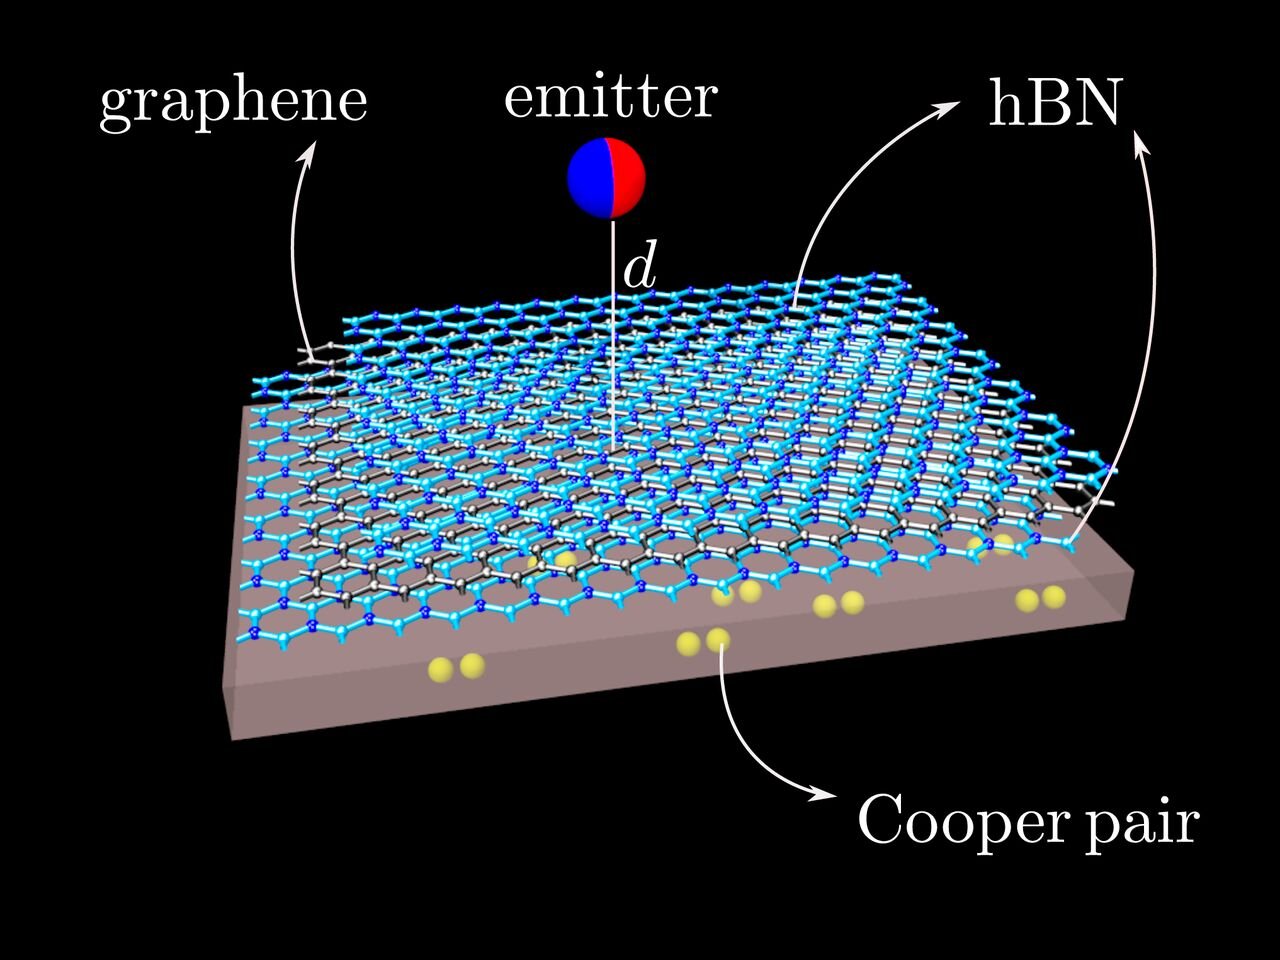 Graphene helps to shed light on superconductors’ dark physics